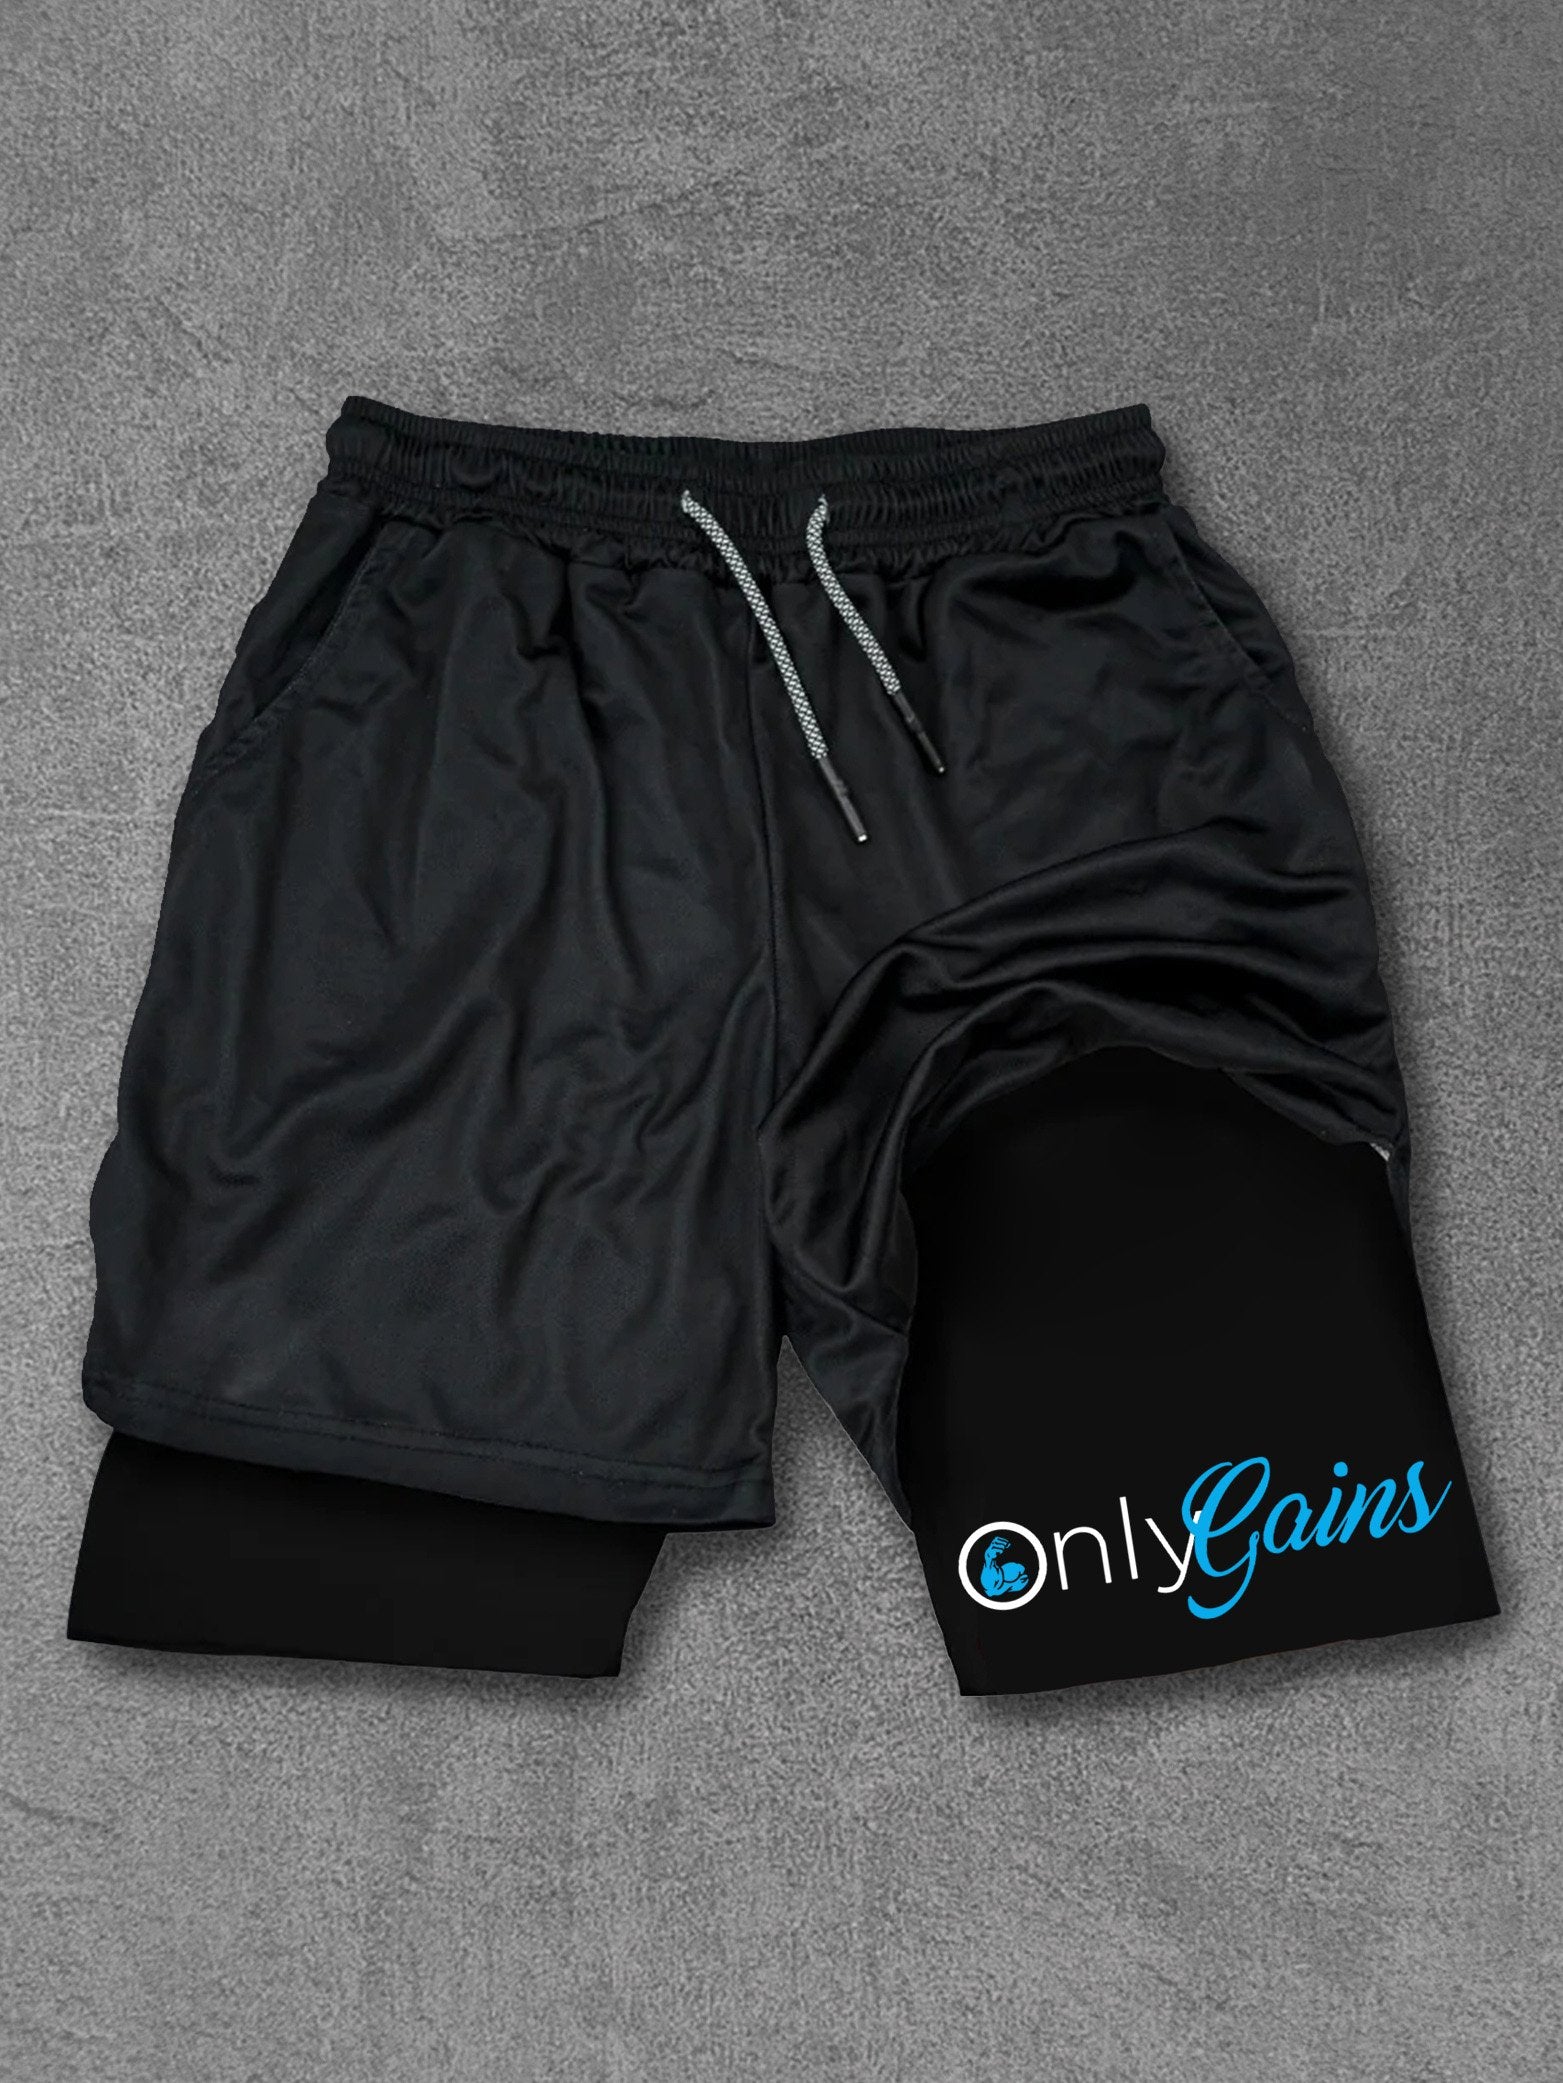 only gains Performance Training Shorts